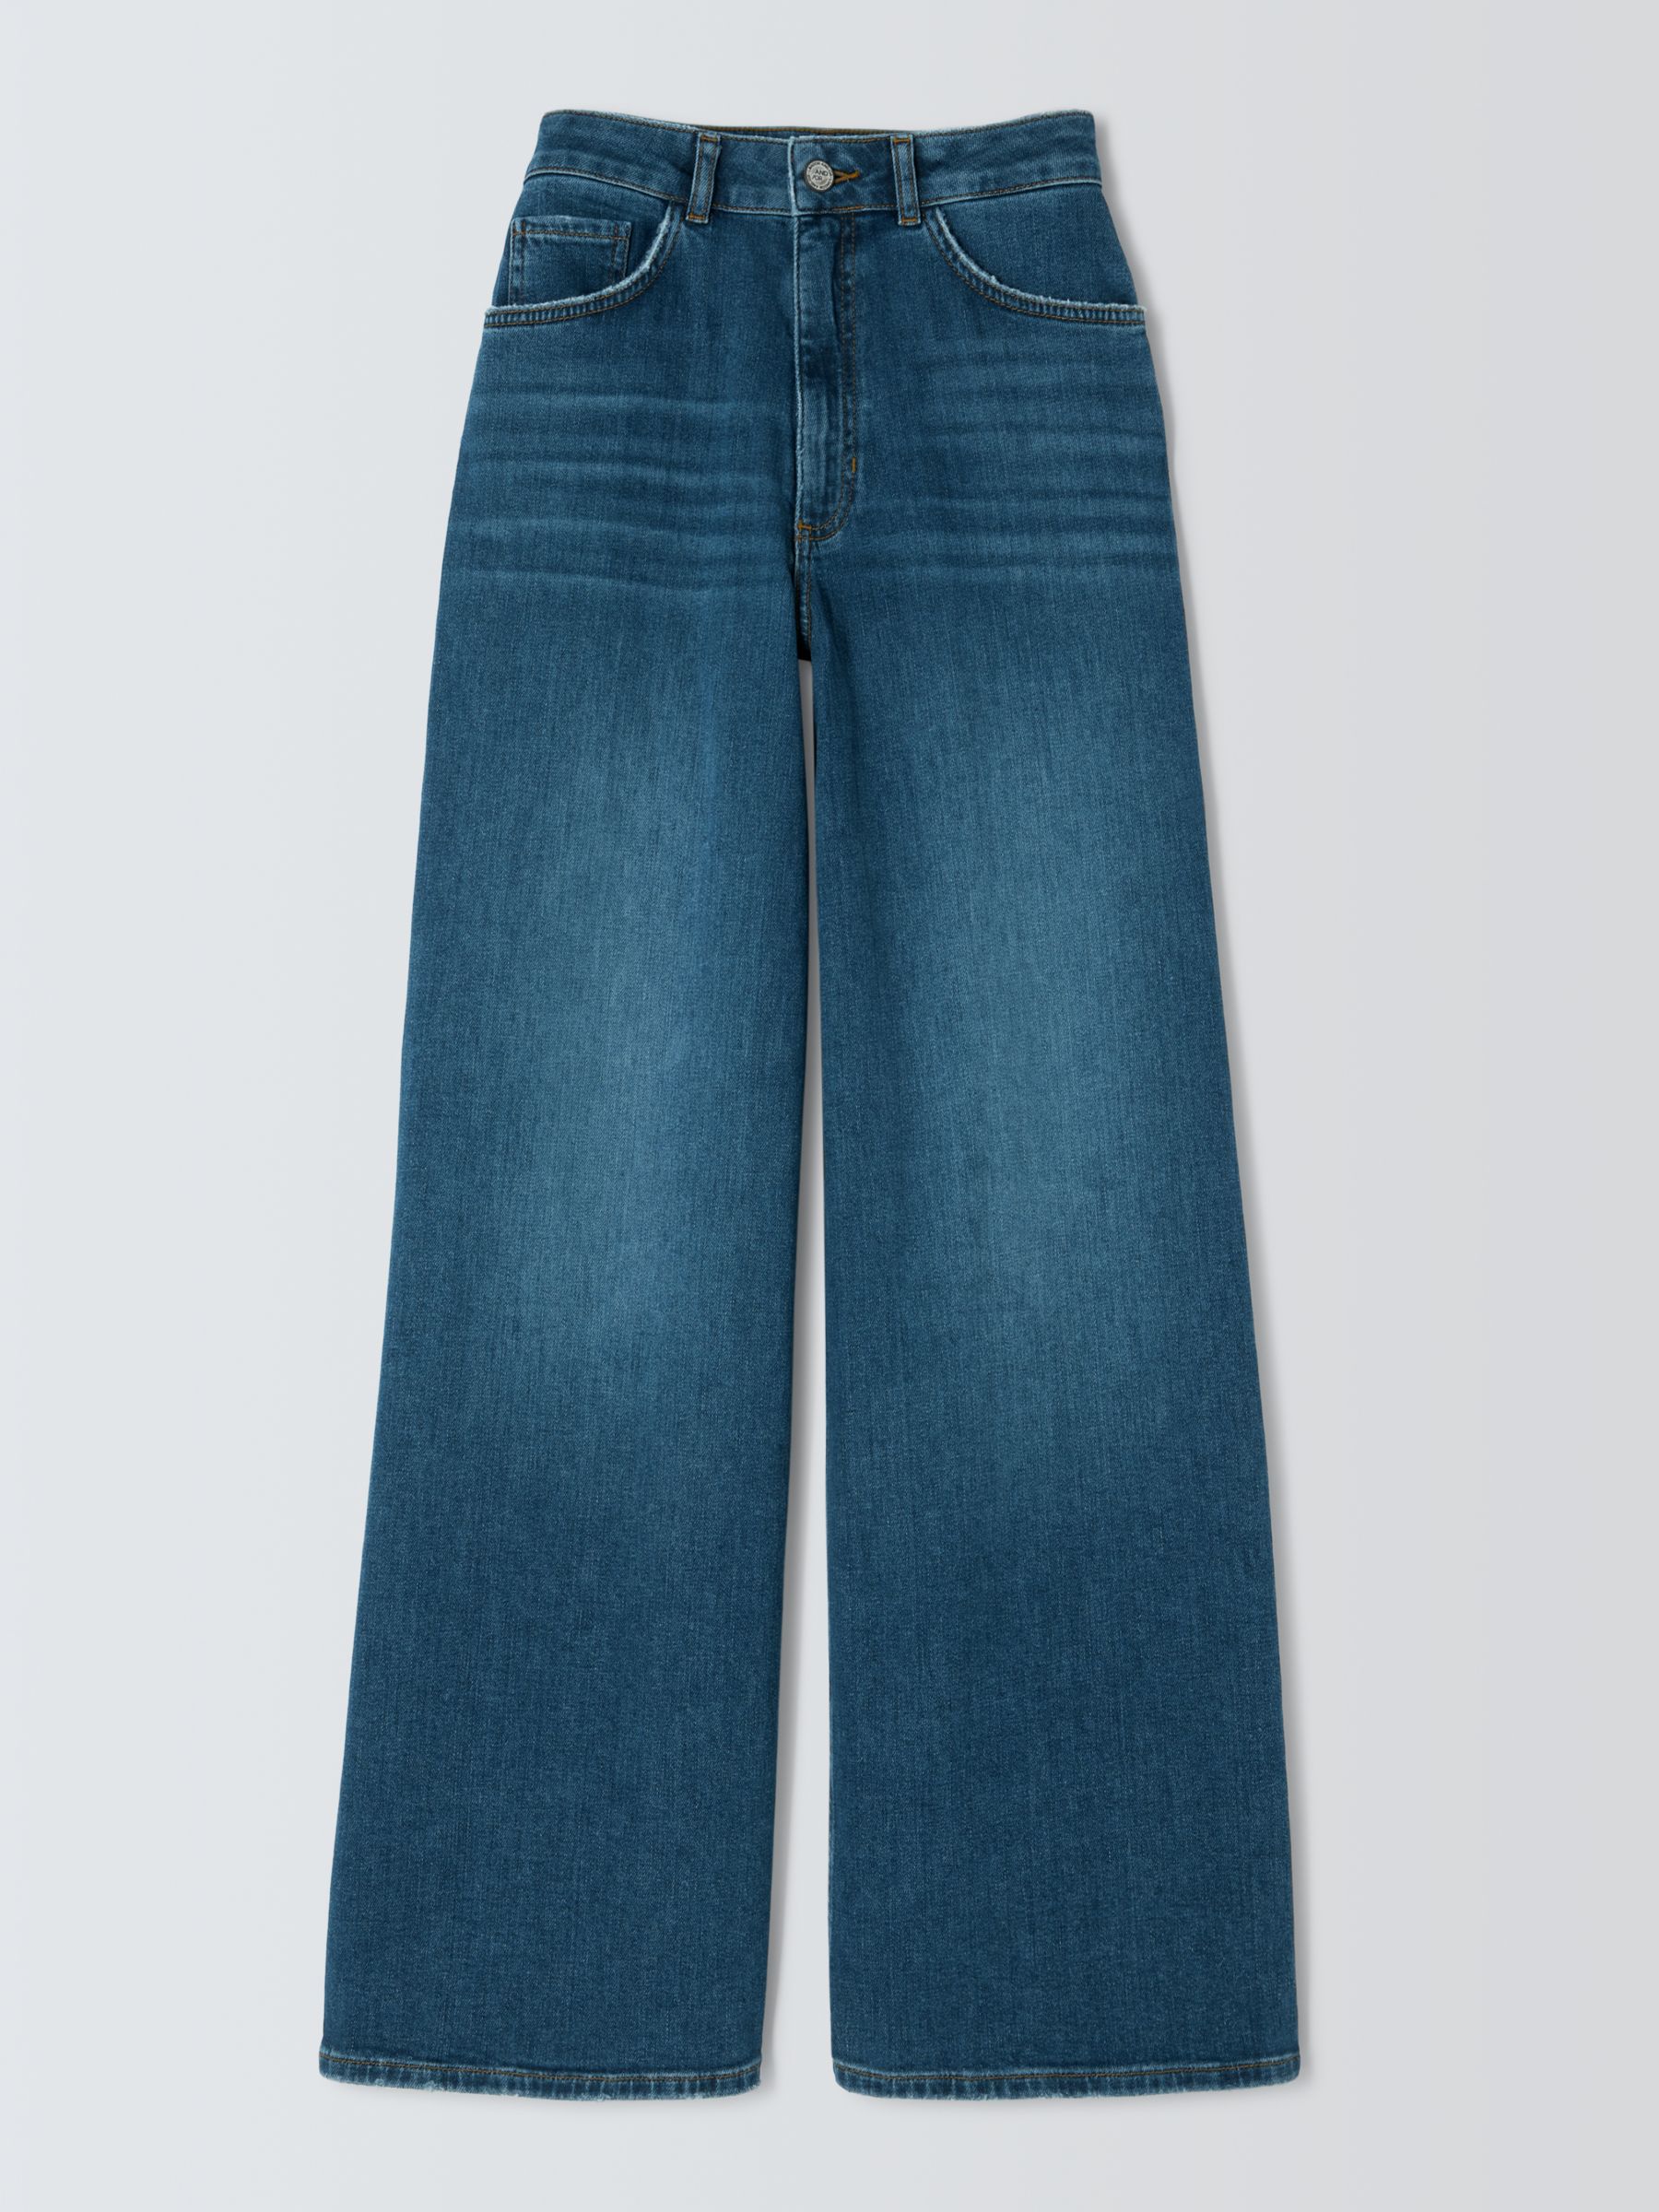 AND/OR Westlake High Rise Wide Leg Jeans, Blue Horizon, 26R